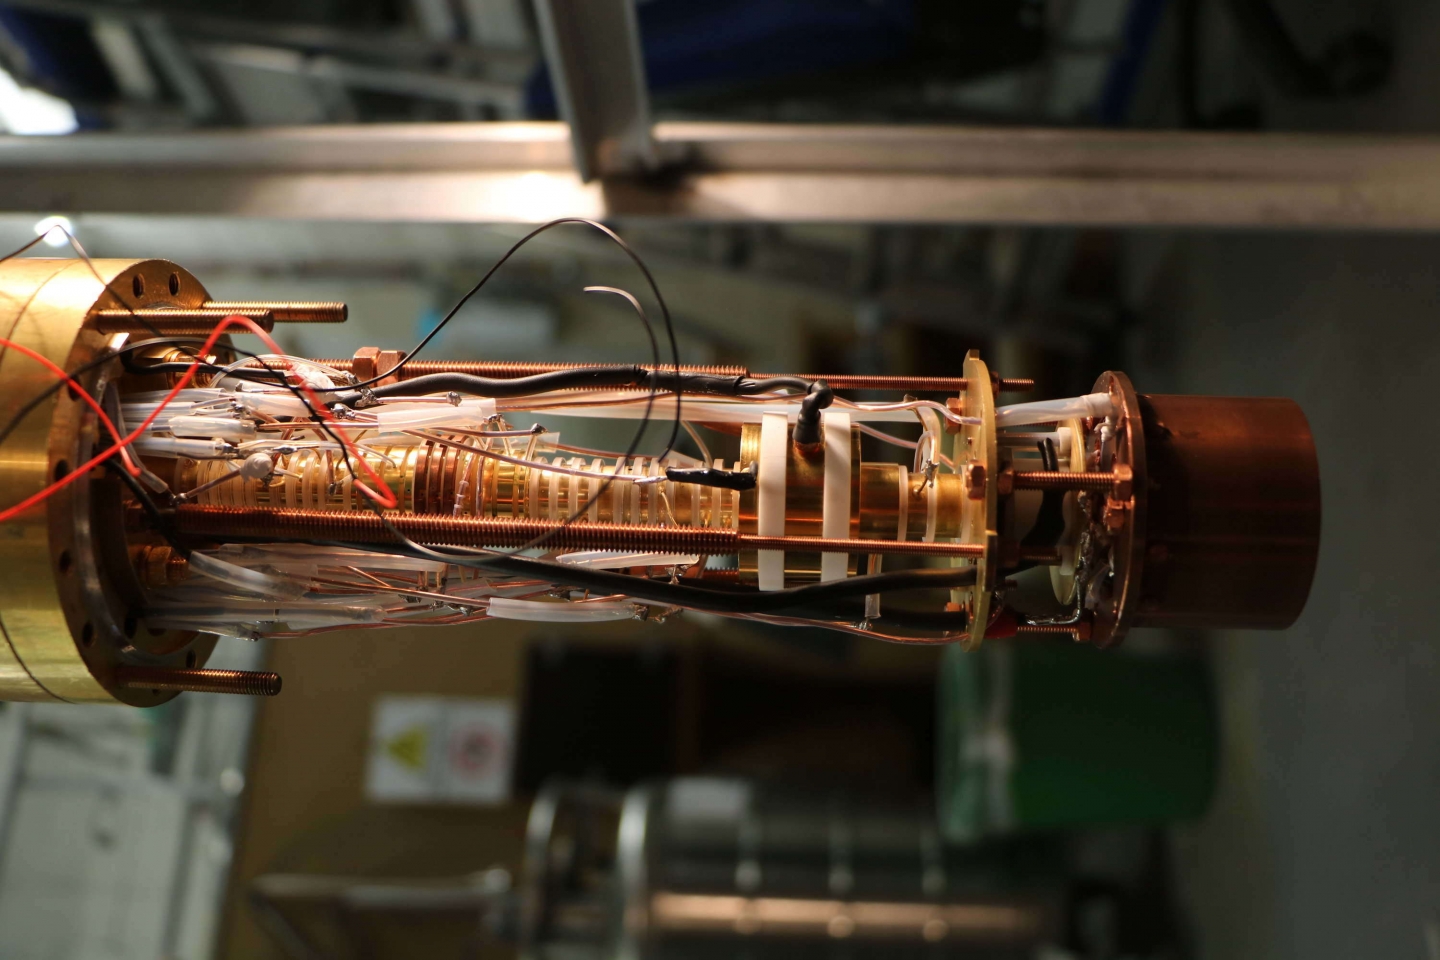 CERN know-how helps weigh the proton 